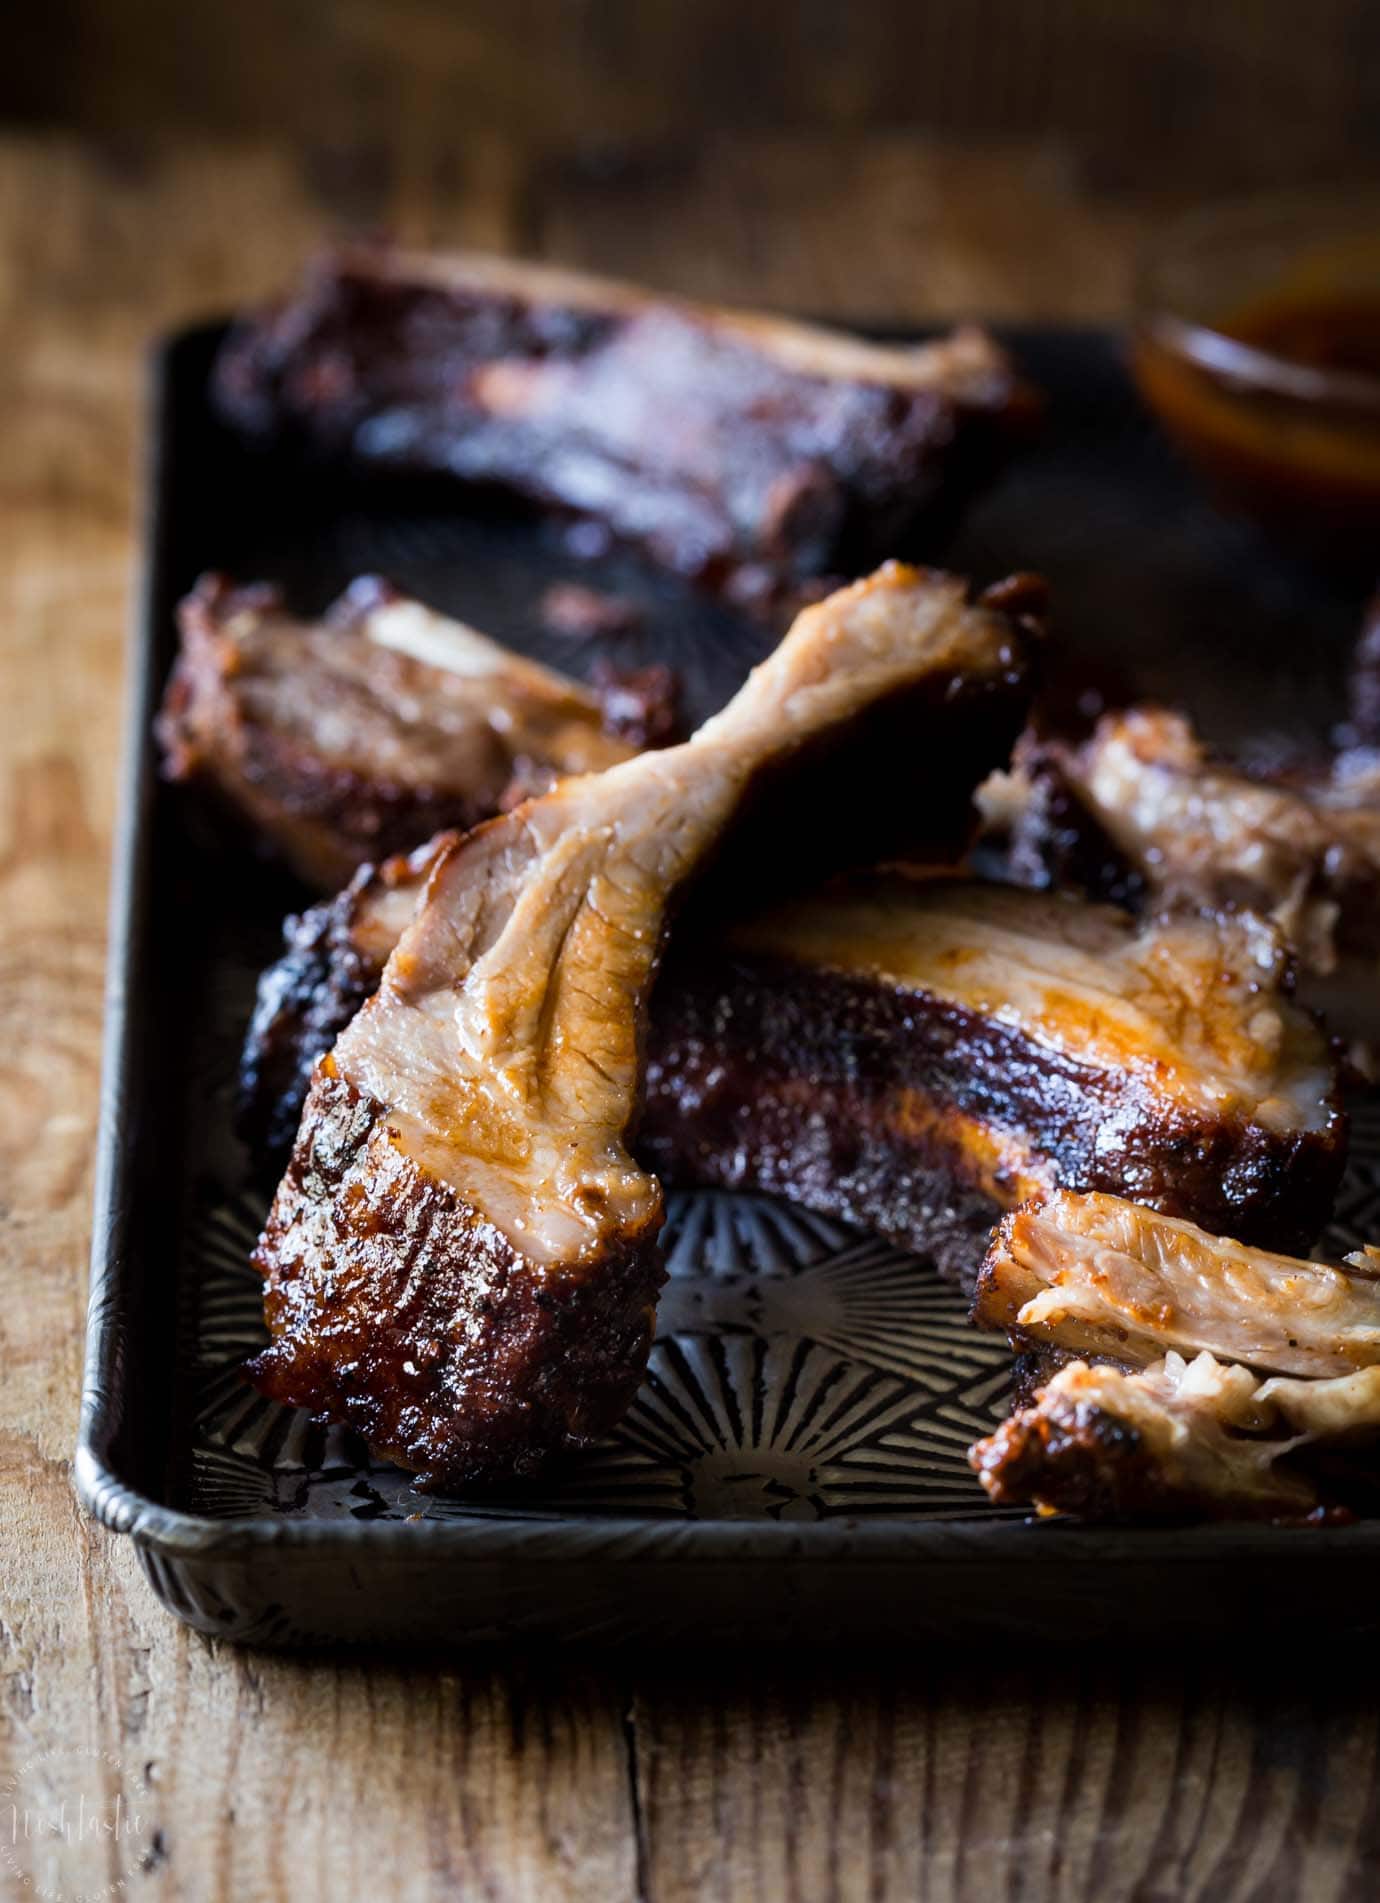 Slow Cooker Baby Back Ribs that are fall off the bone tender, delicious with a Memphis style rub and easy homemade BBQ sticky sauce! gluten free too!